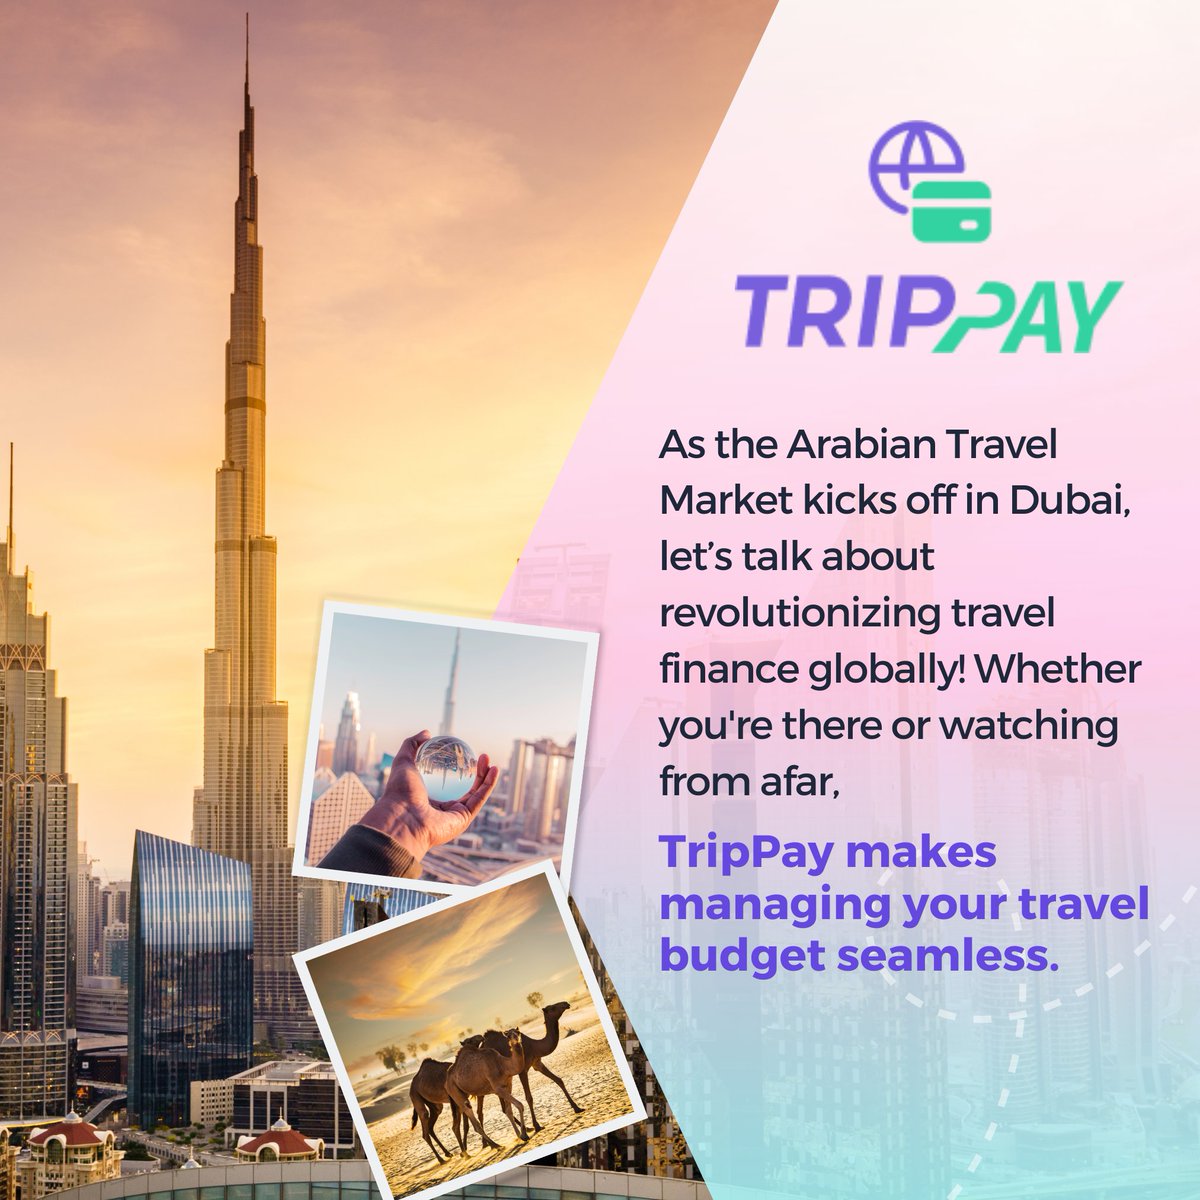 Spotlight on Dubai! 🌟 As global travelers gather at the Arabian Travel Market, remember that TripPay is your perfect companion for managing diverse currencies and expenses effortlessly.

Explore smart, spend smarter! 

#Dubai #GlobalTravel #Fintech #ArabTravelMarket #Dubai2024